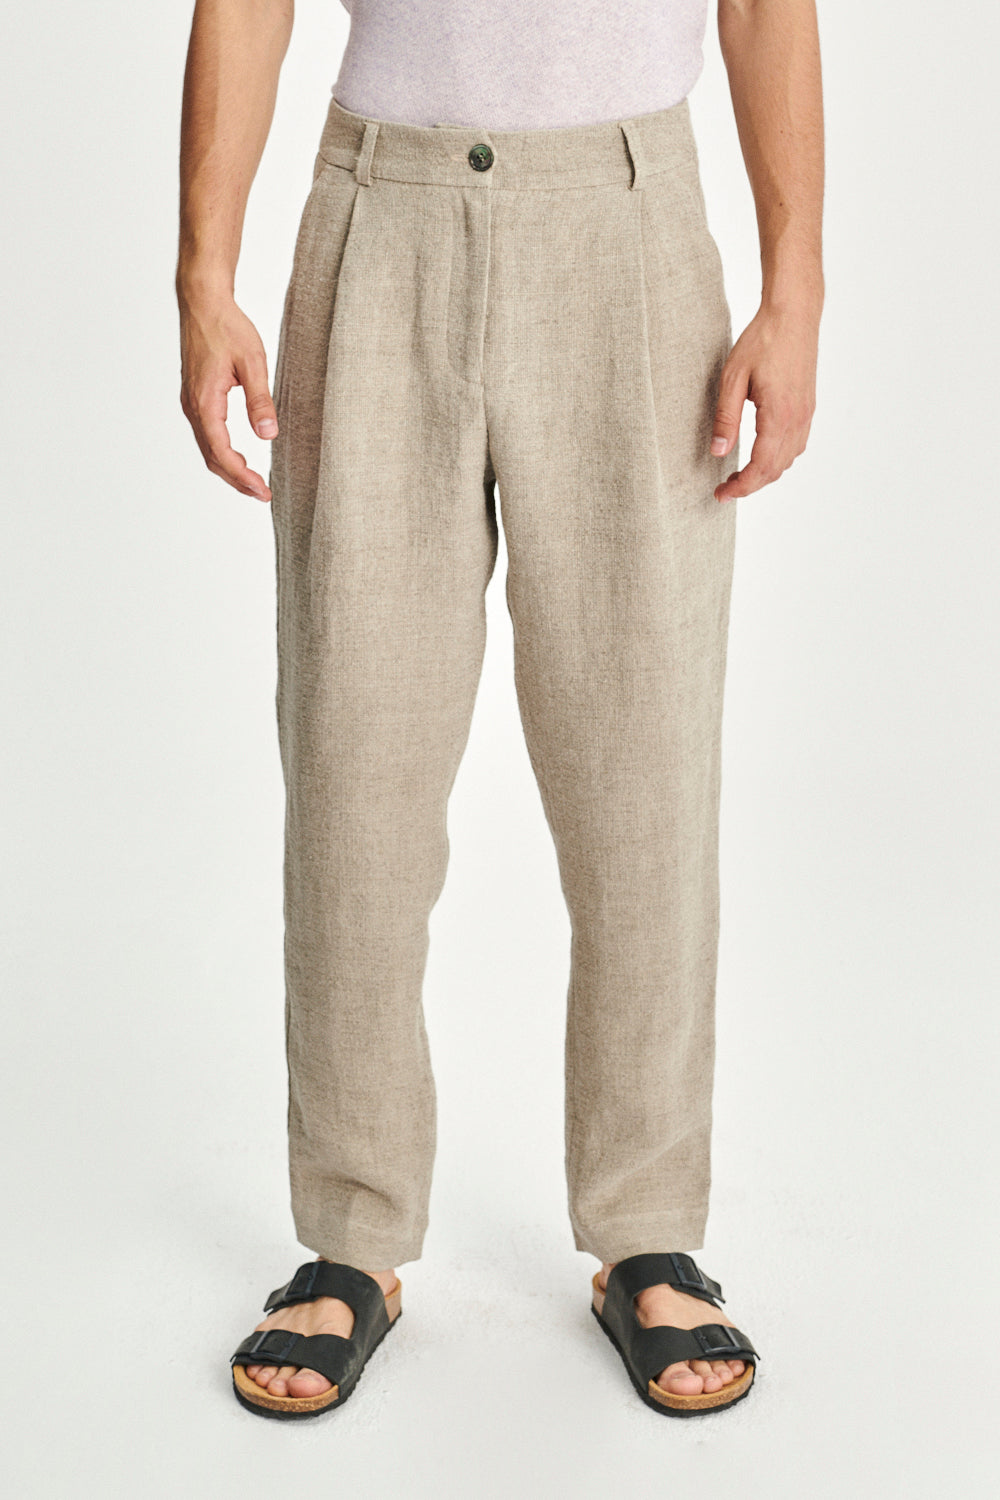 Genuine Trousers in a Beige Fluid and Structured Italian Linen Crepe